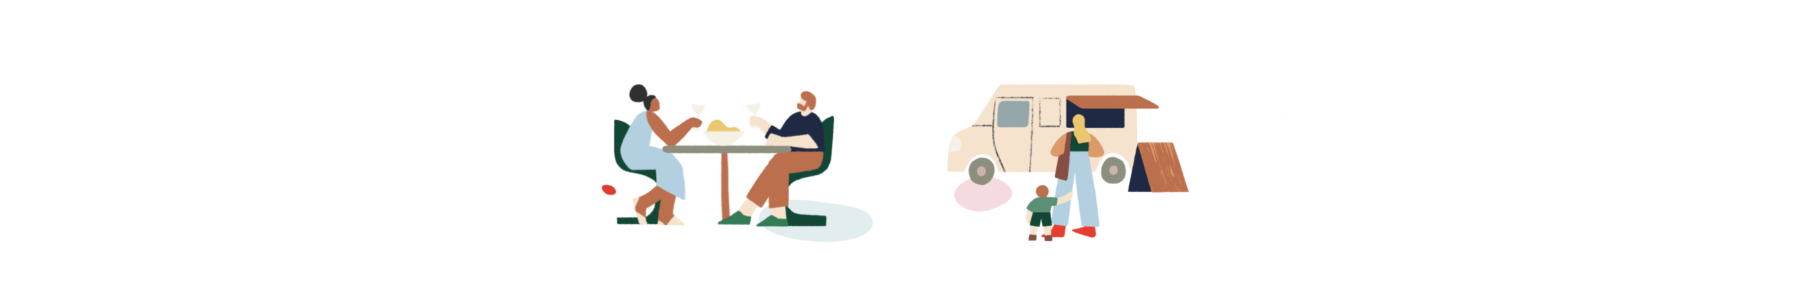 Illustrations of a couple eating dinner and of a woman and her son walking towards their camper van.